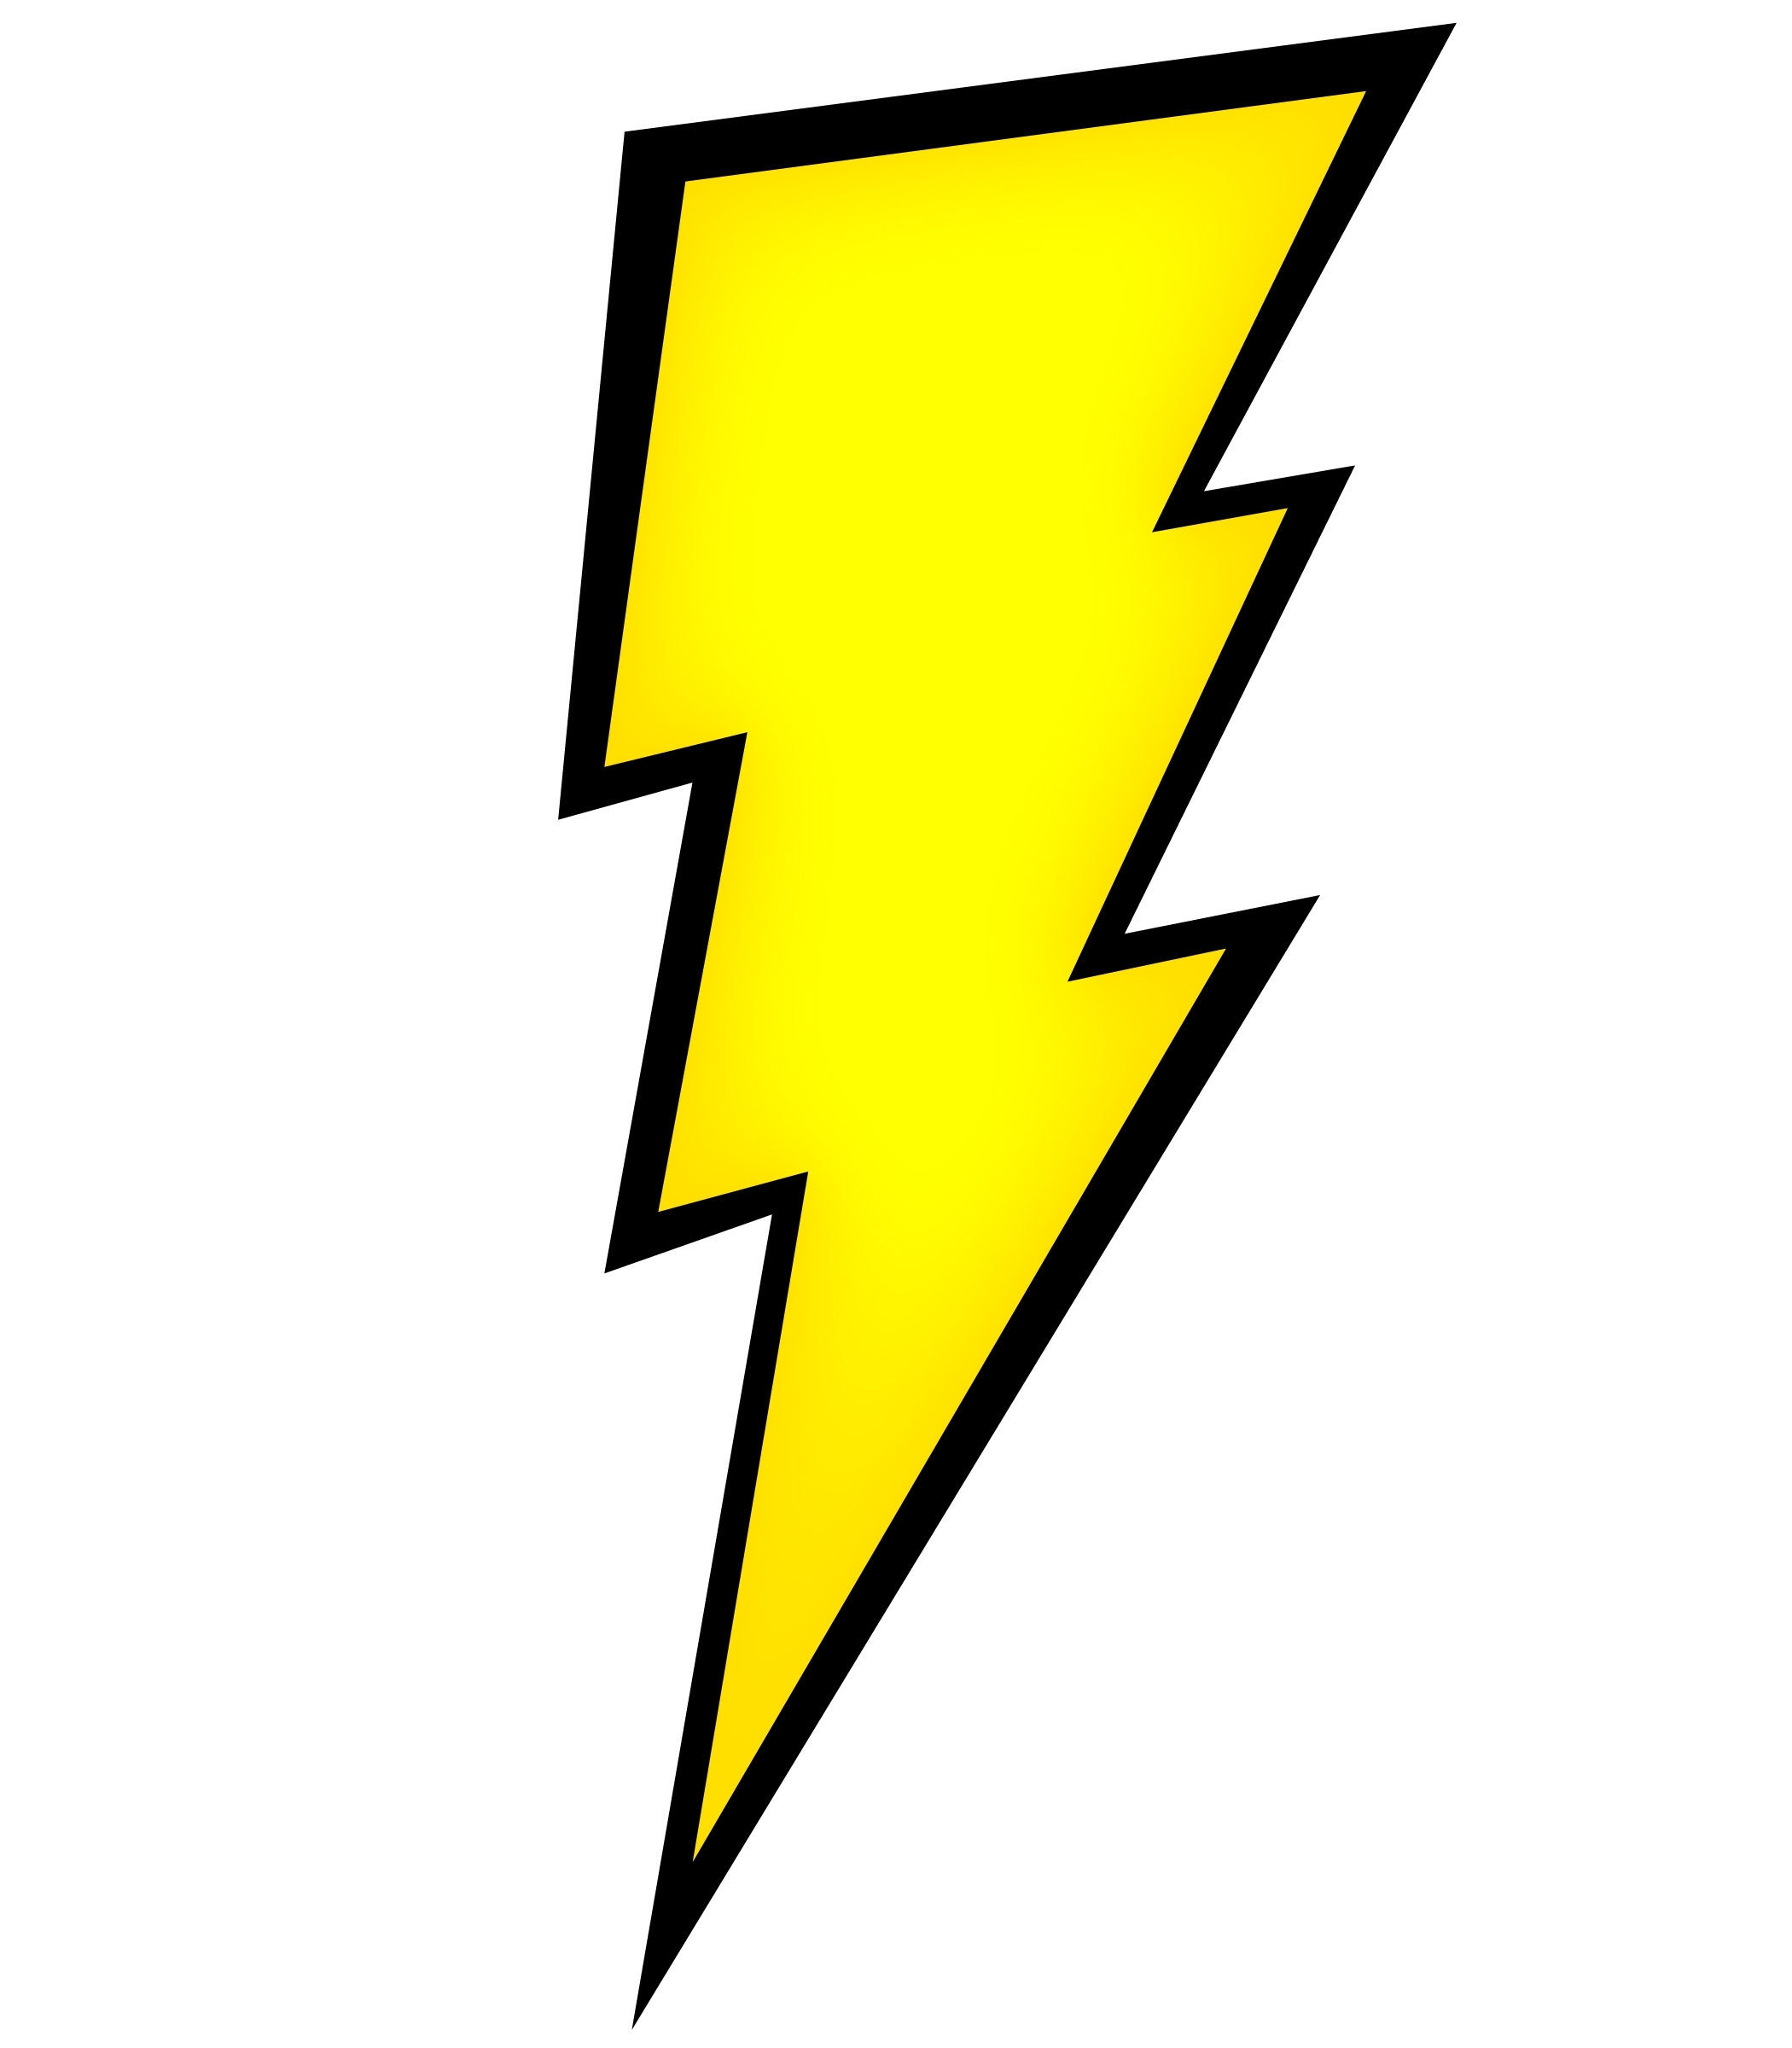 Picture Of A Lightning Bolt - ClipArt Best